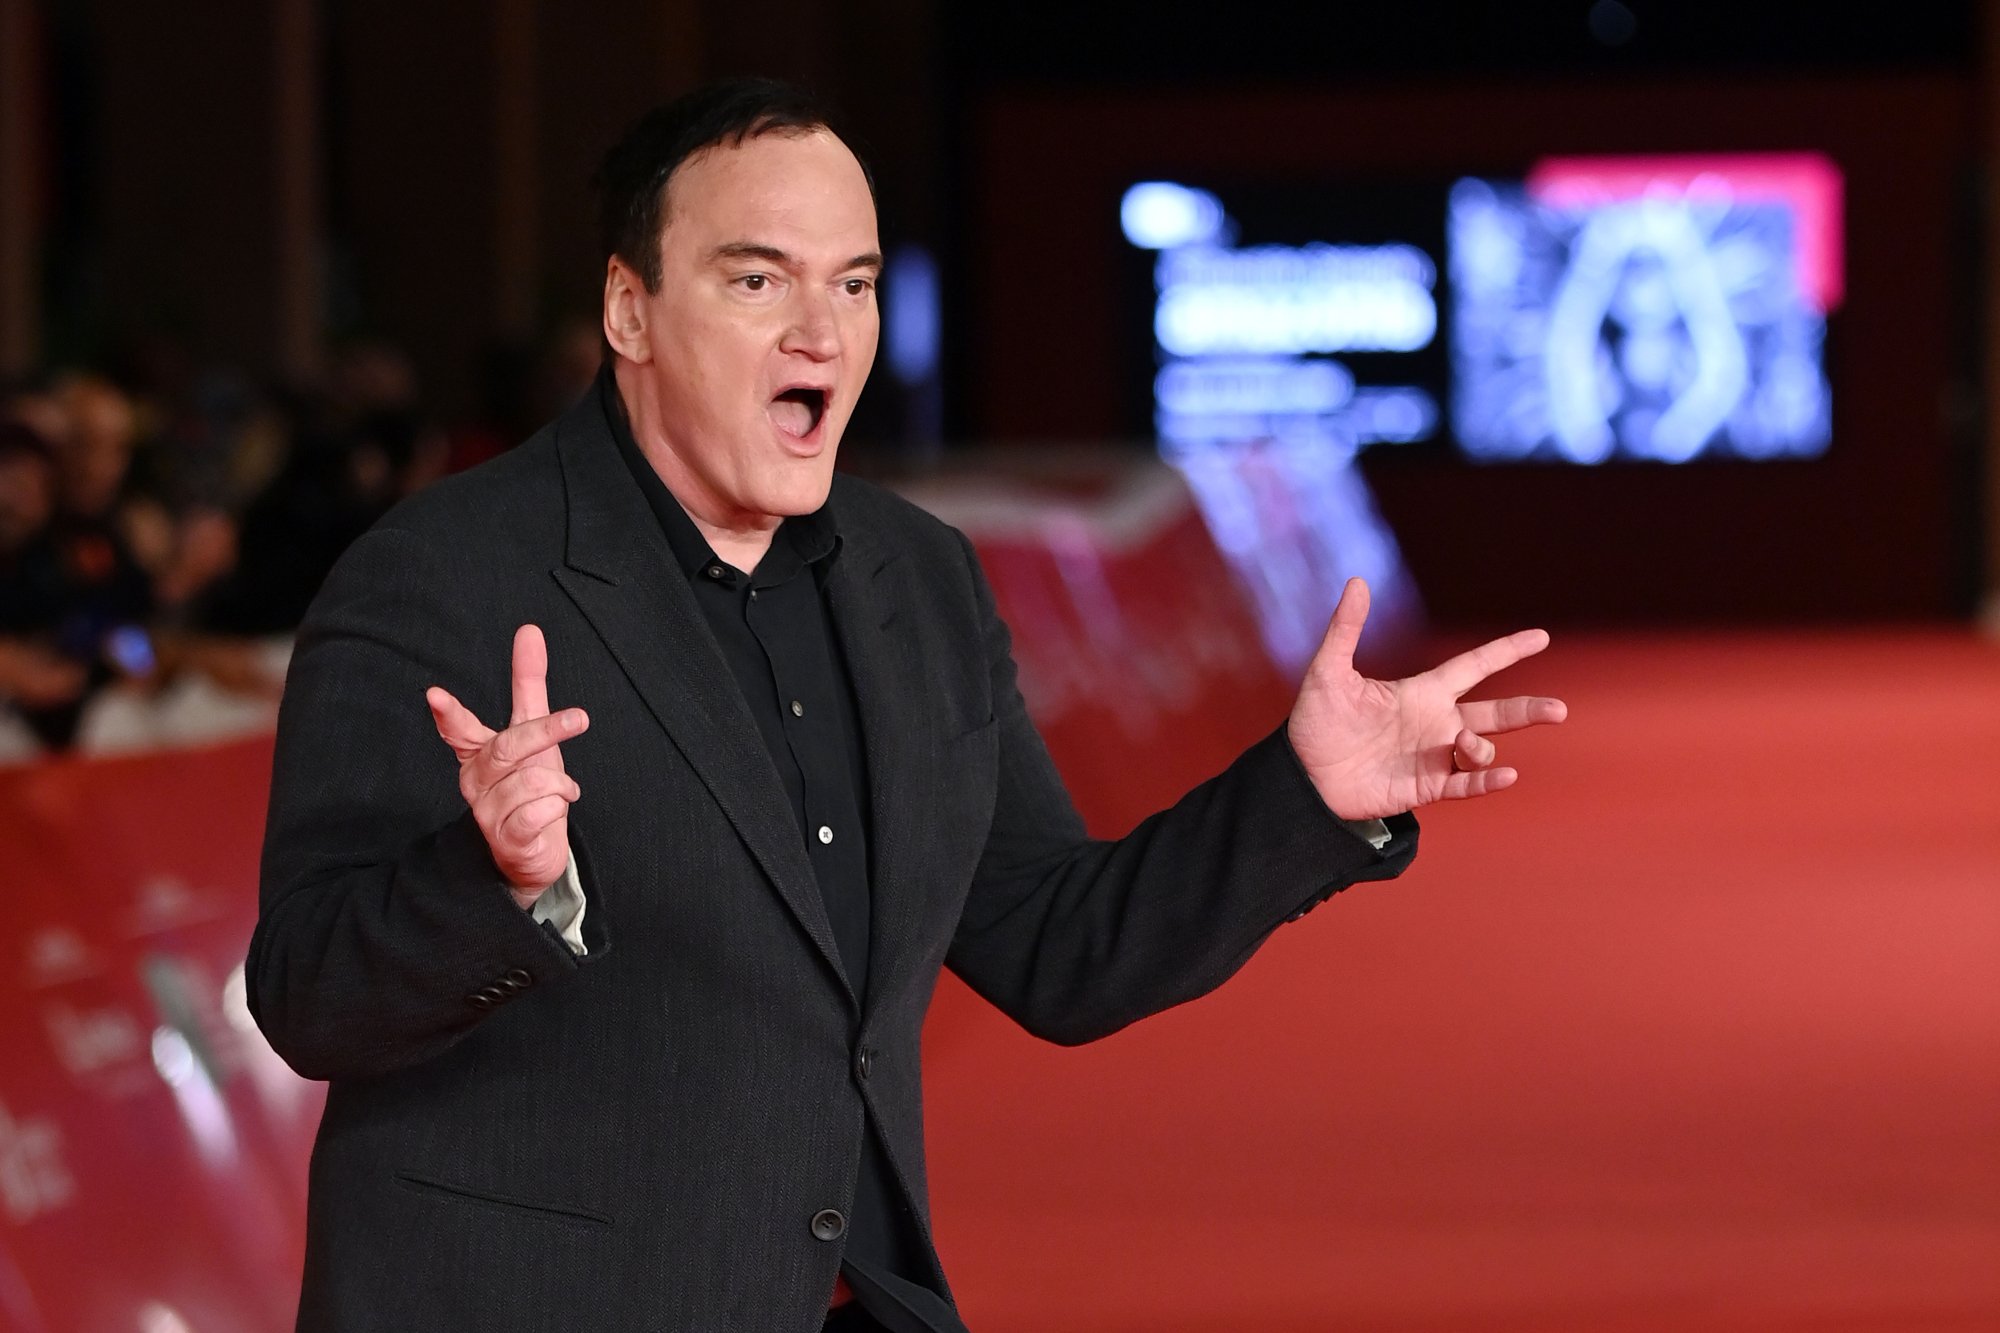 Quentin Tarantino at the Rome Film Festival looking surprised